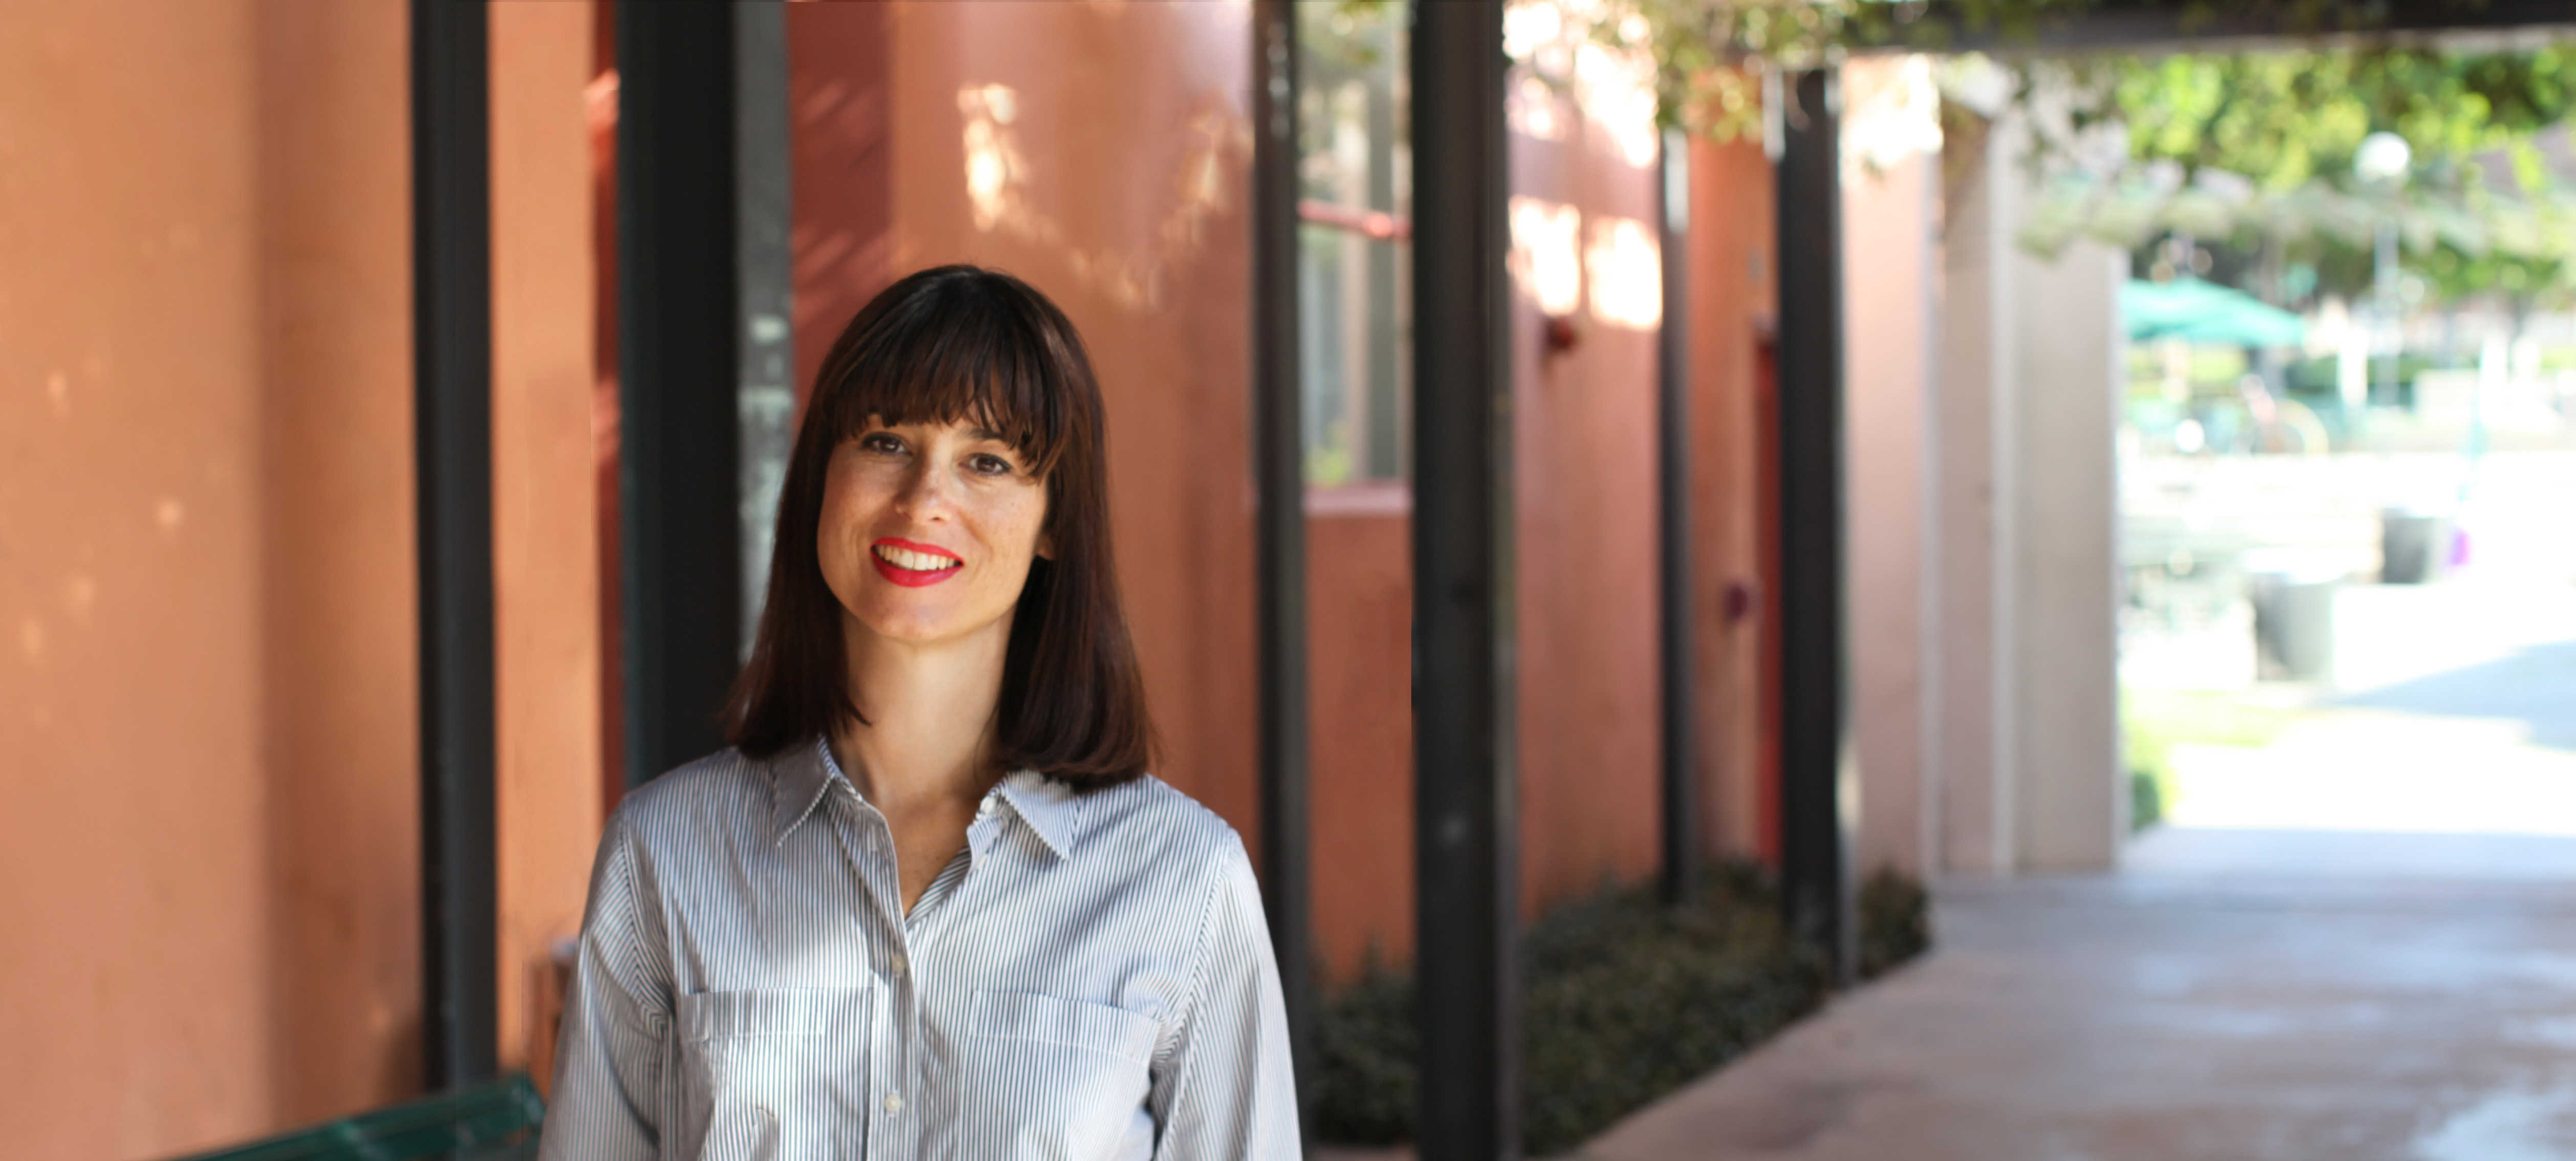 Heather Flood named Undergraduate Chair of Architecture